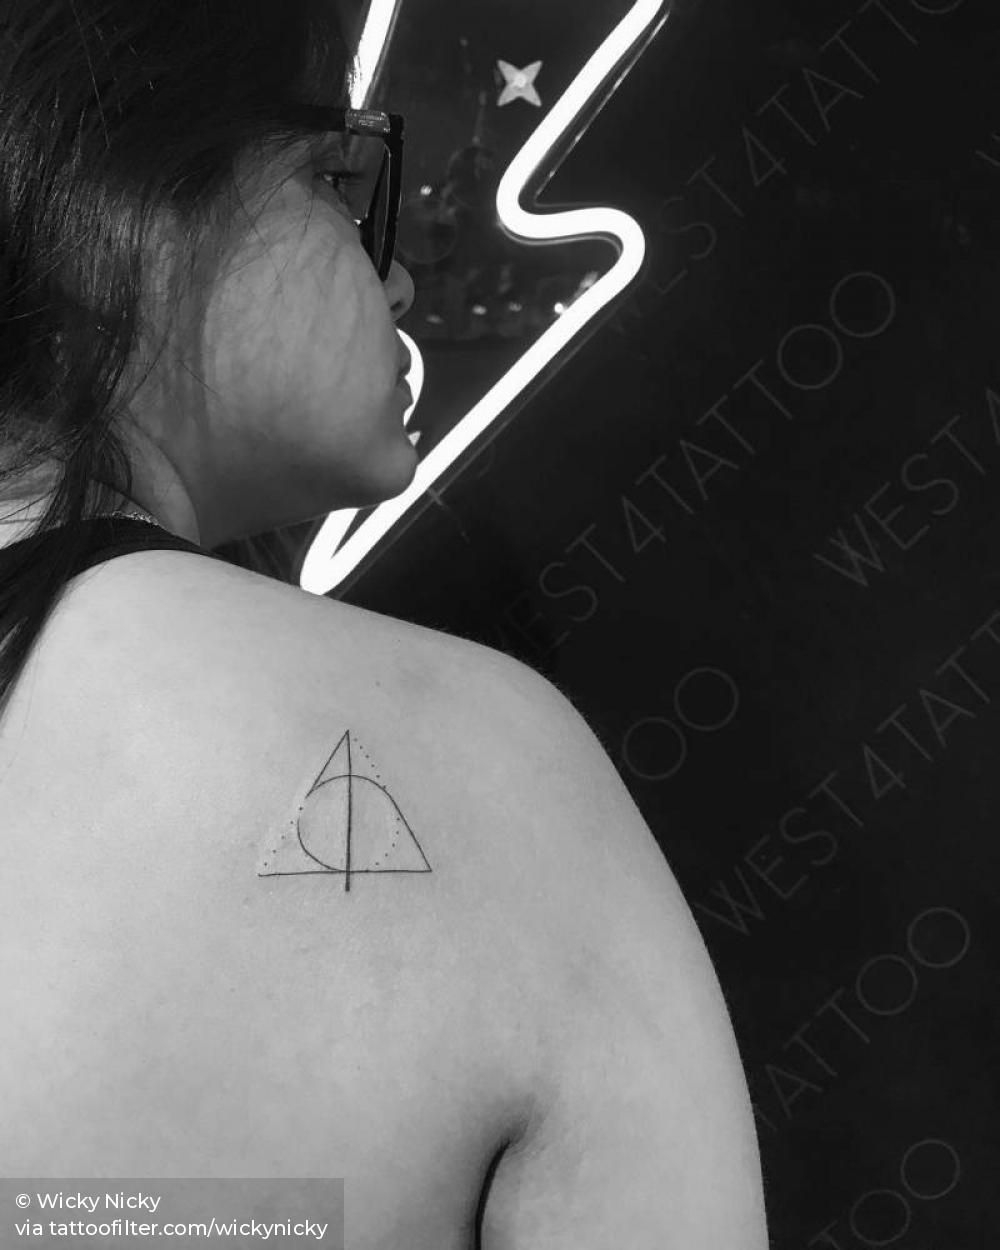 Deathly Hallows Symbol Tattoo On The Shoulder Blade Film And Book regarding size 1000 X 1250